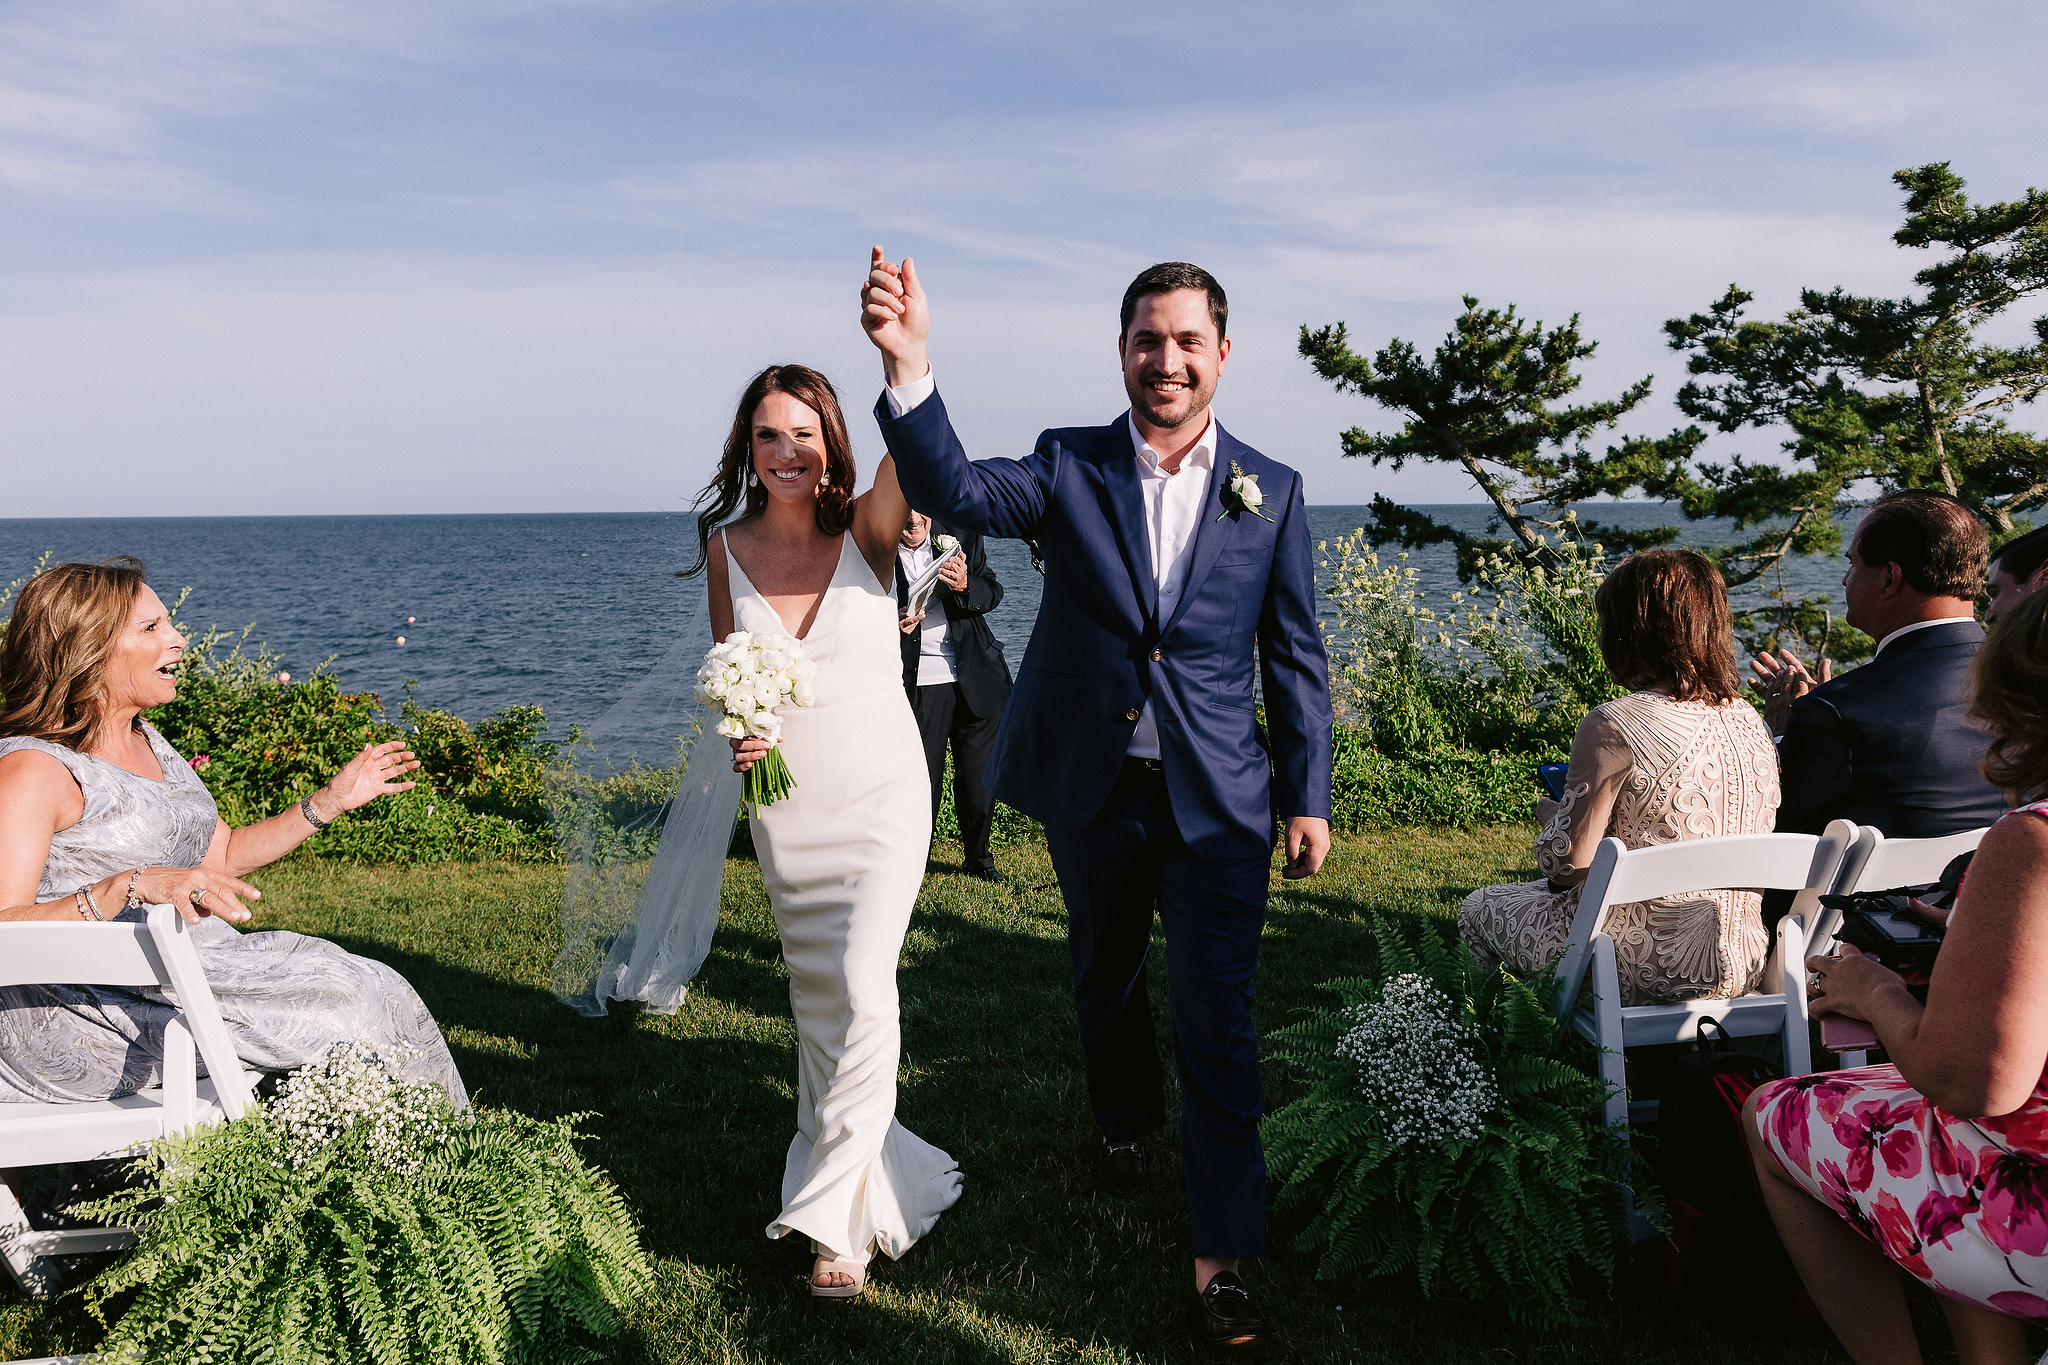 bride and groom recessional, smiles and happiness as they celebrate their new bond with guests clapping